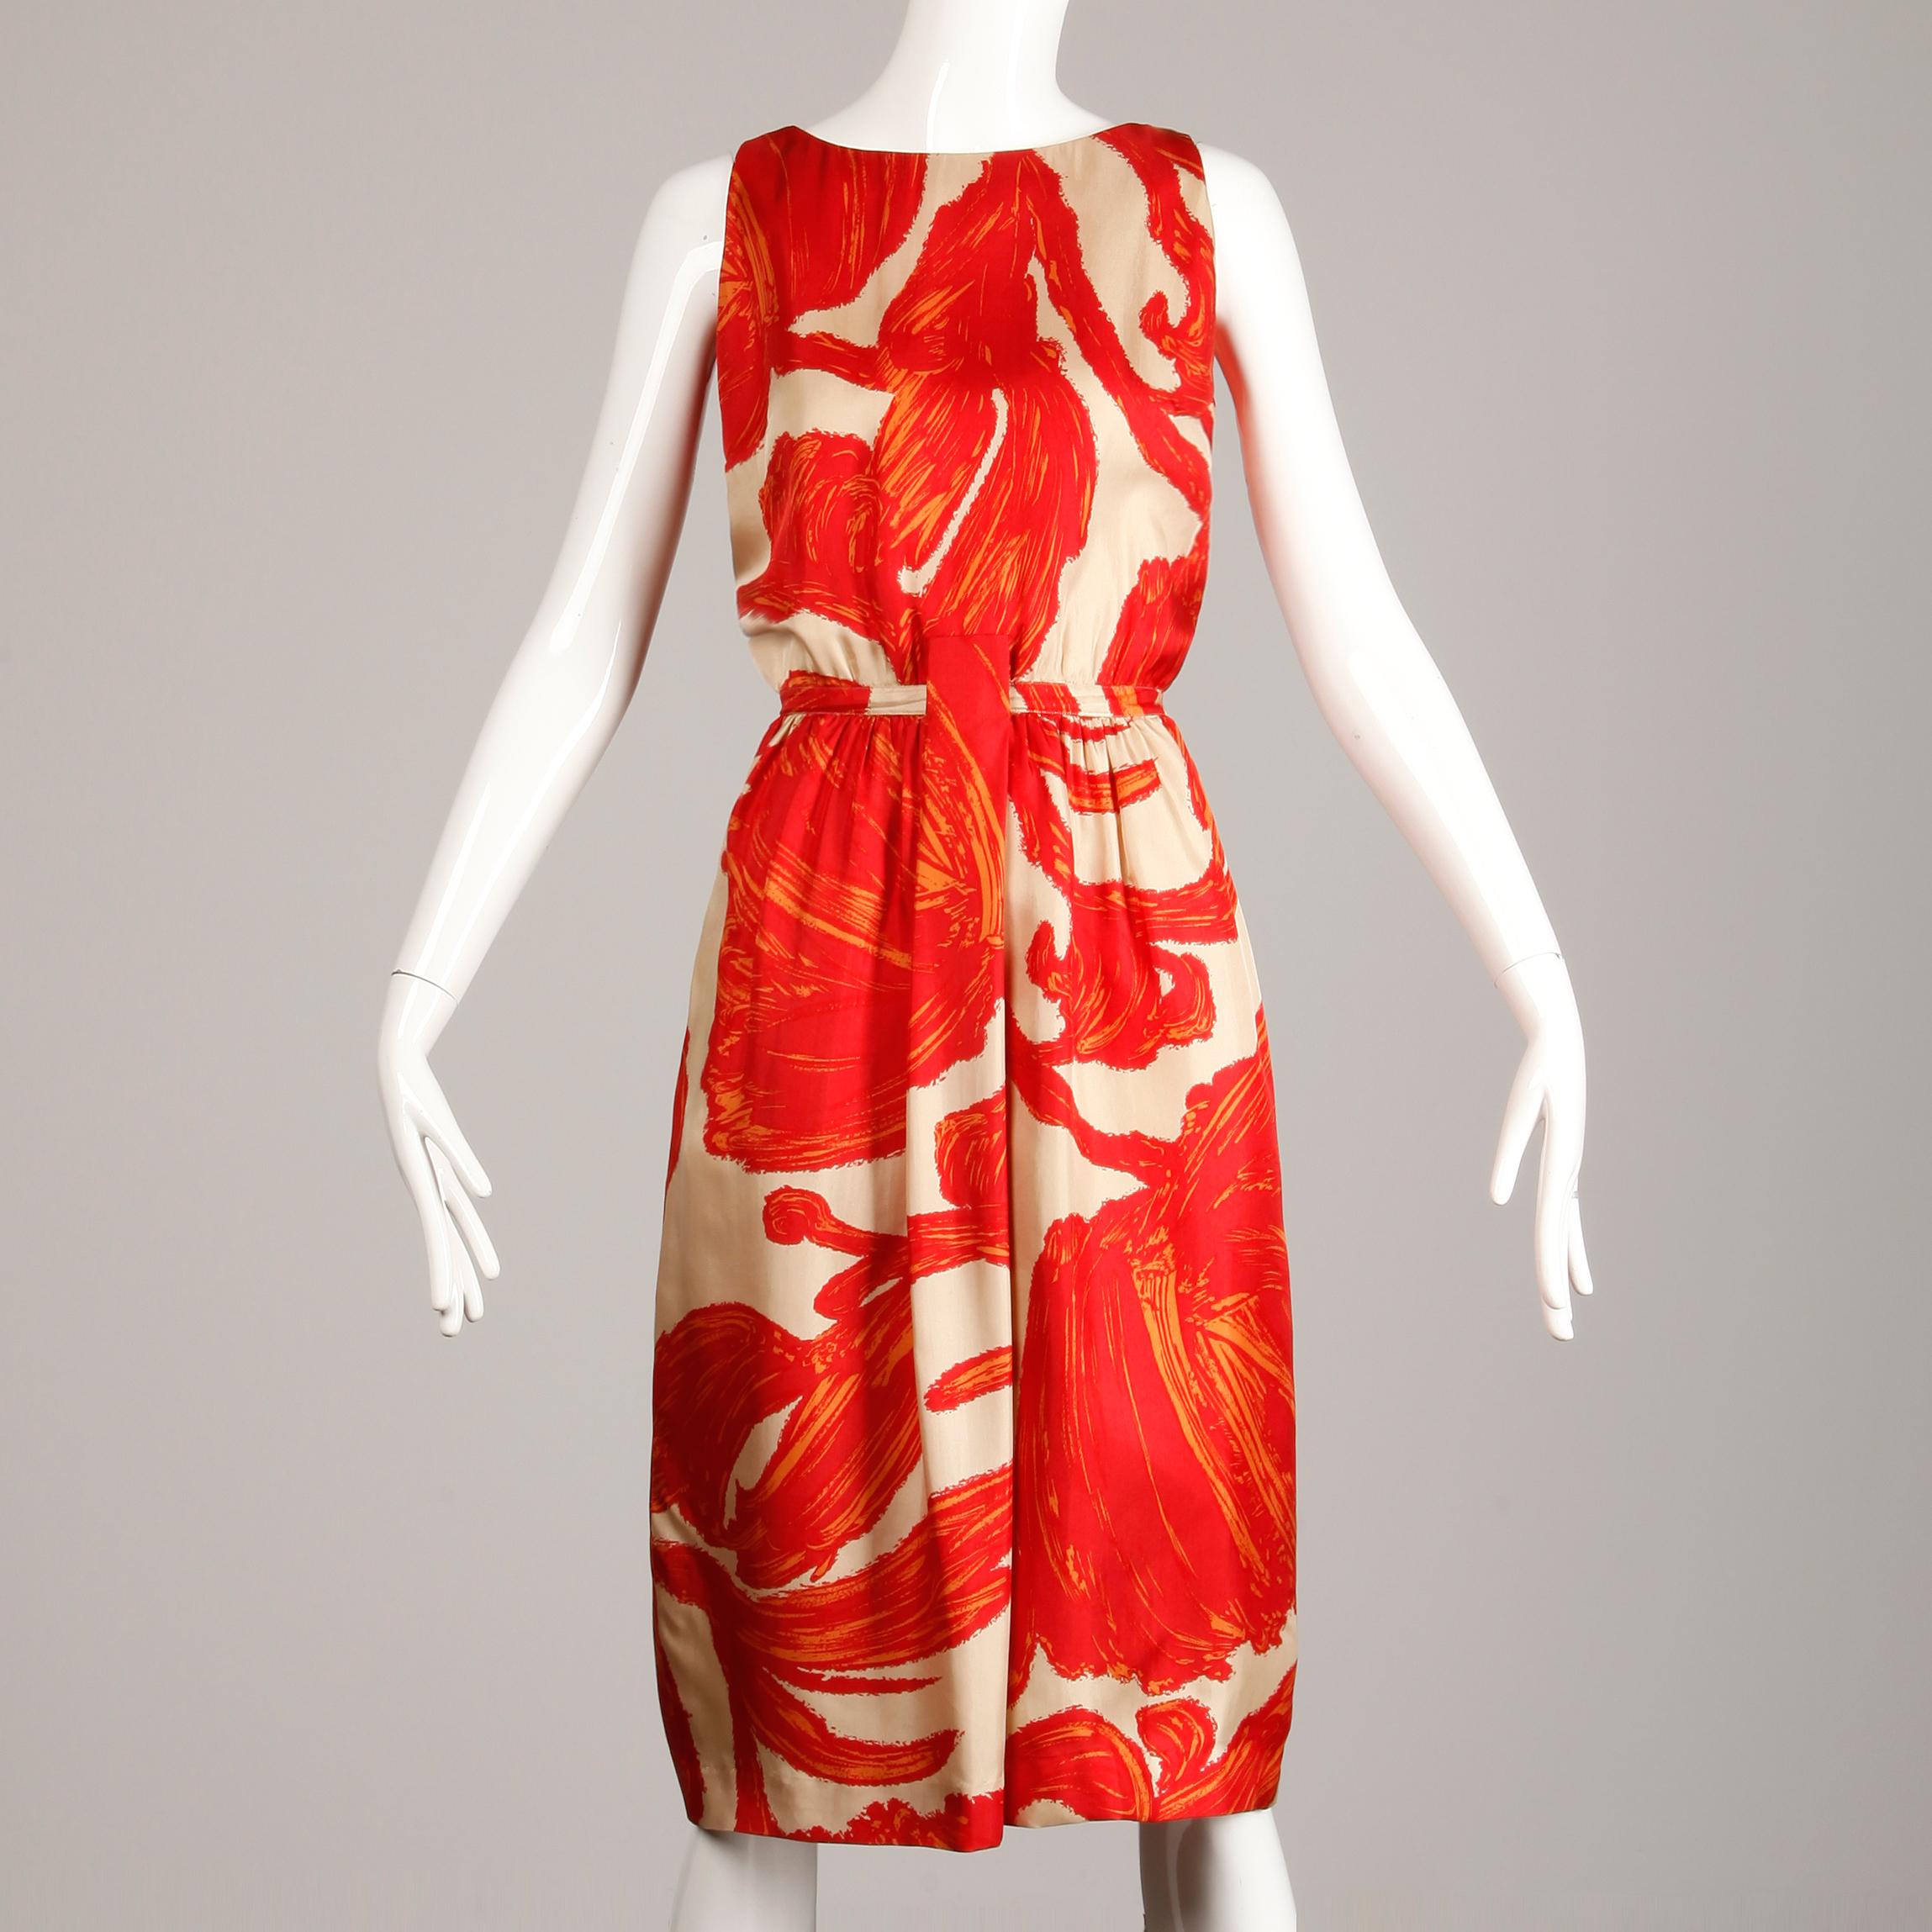 Gorgeous 1960s silk sheath dress by B.H. Wragge with a 1963 label and a midcentury print. Fully lined with rear zip and hook closure. Hidden side pockets and front belt loop (no belt included). Fits like a modern size medium. The bust measures 43